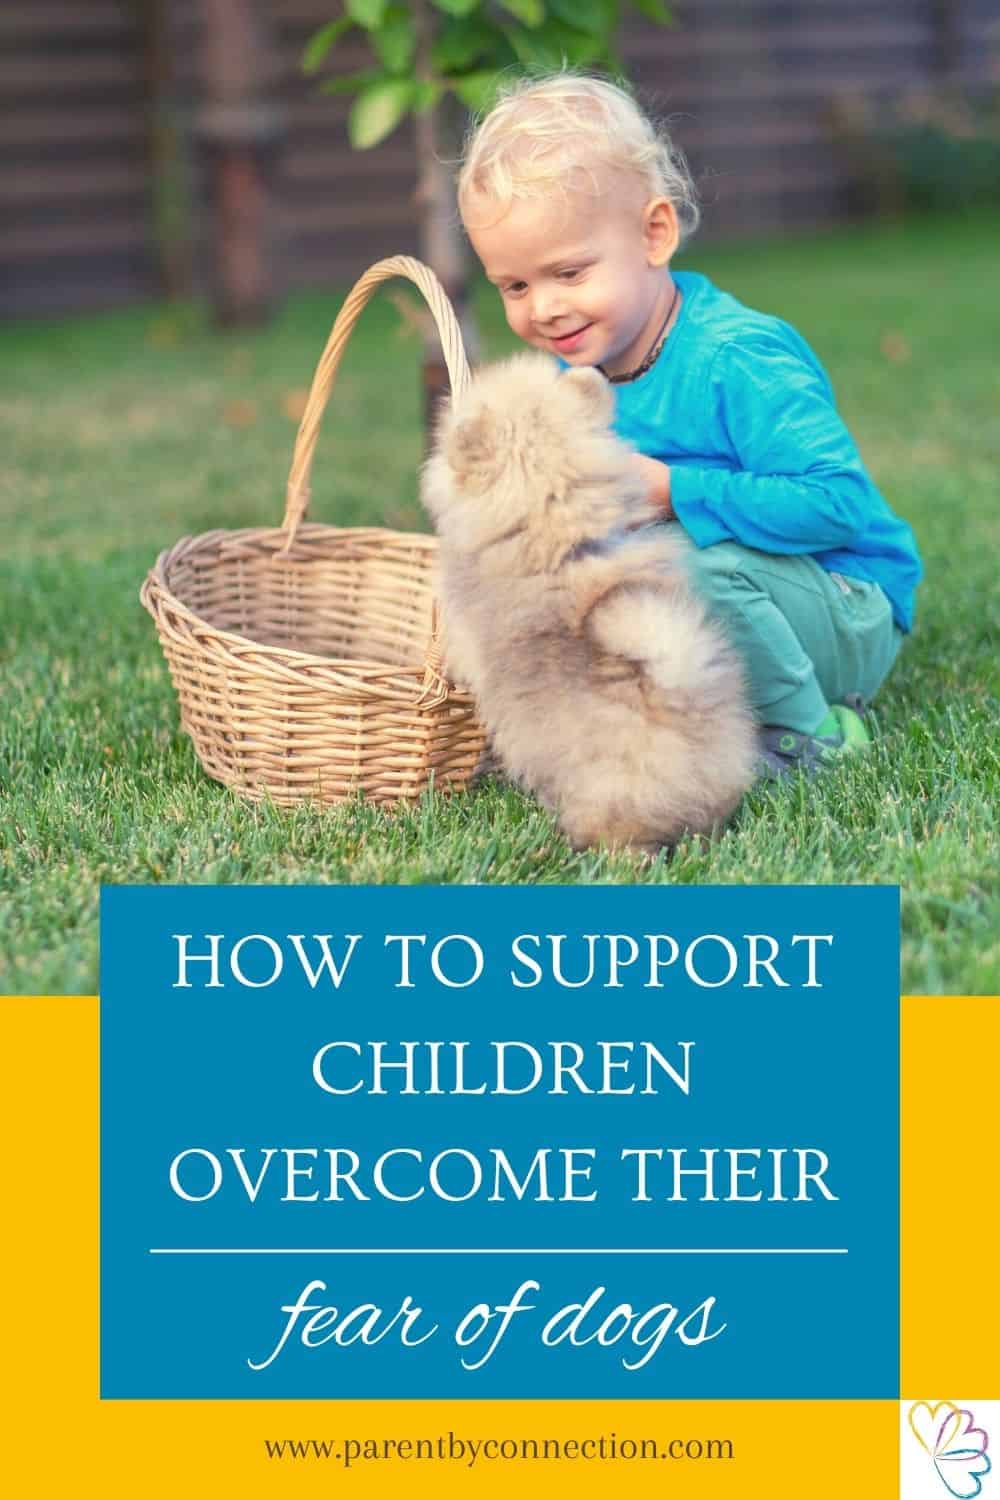 ideas to support children overcome fear of dogs